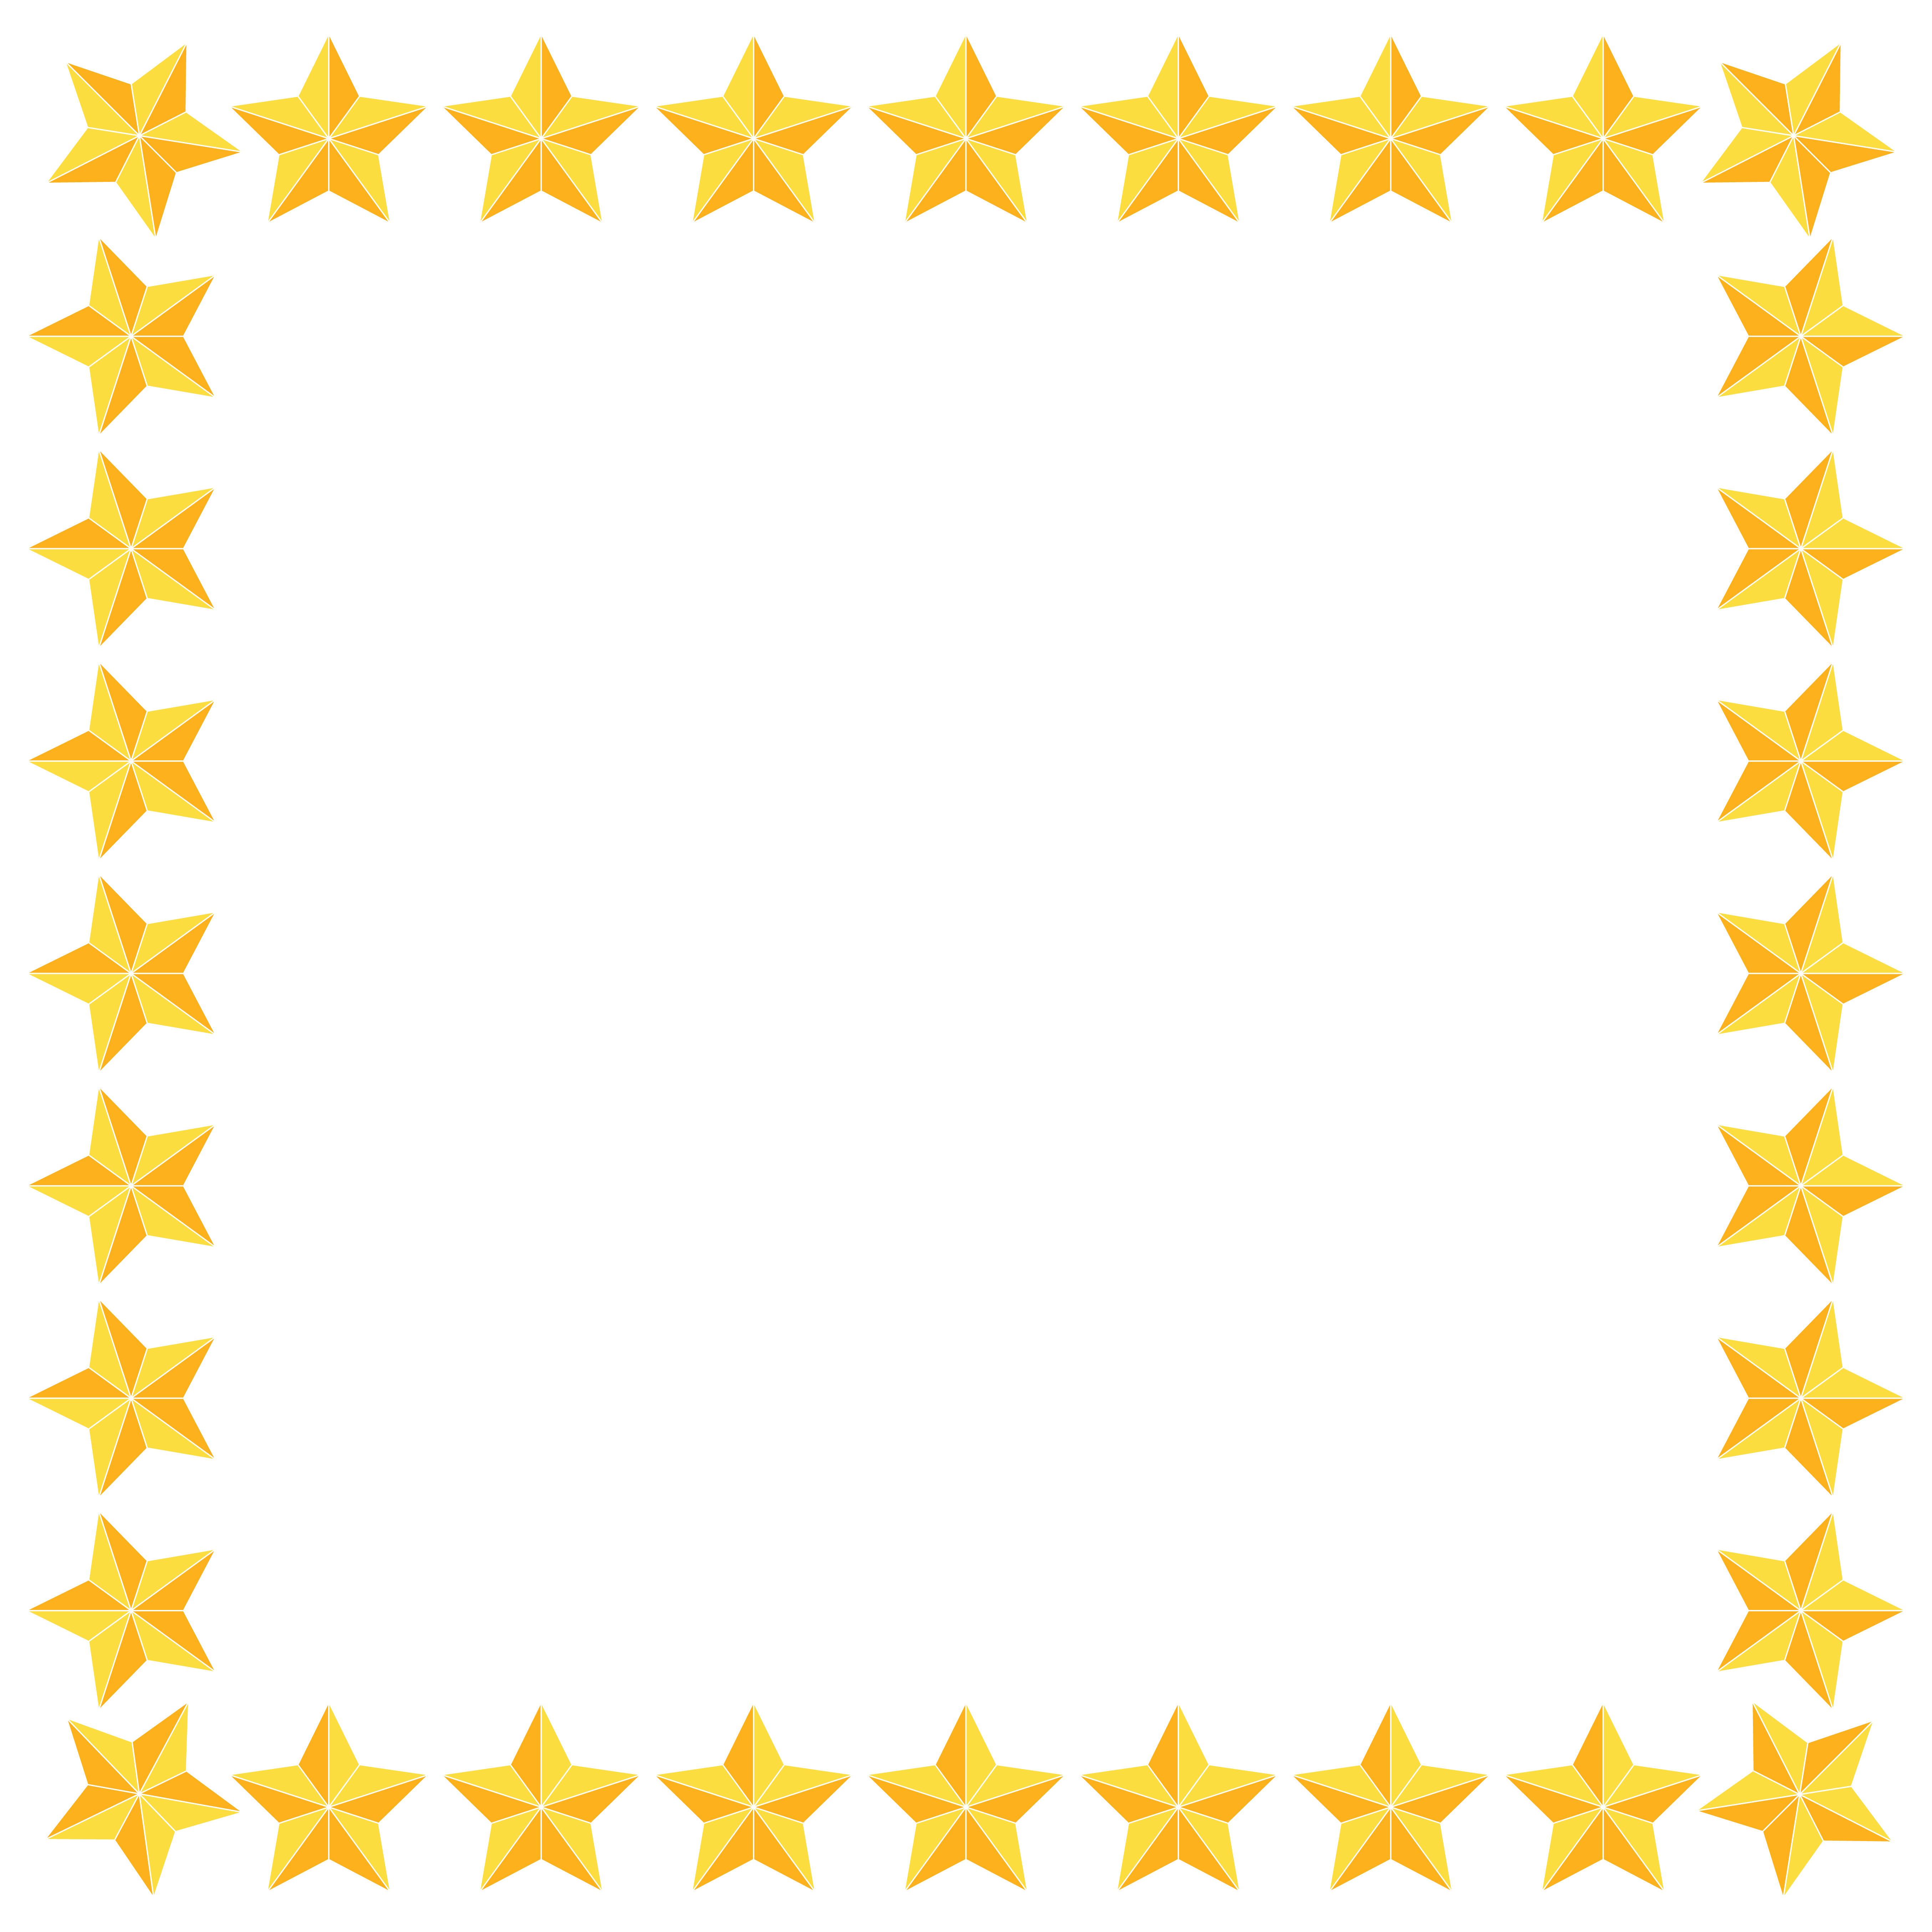 Star frame with copy space. Christmas symbol border background. Golden seasonal vector pattern isolated on white background. Blank picture frame for xmas invitation or banner.